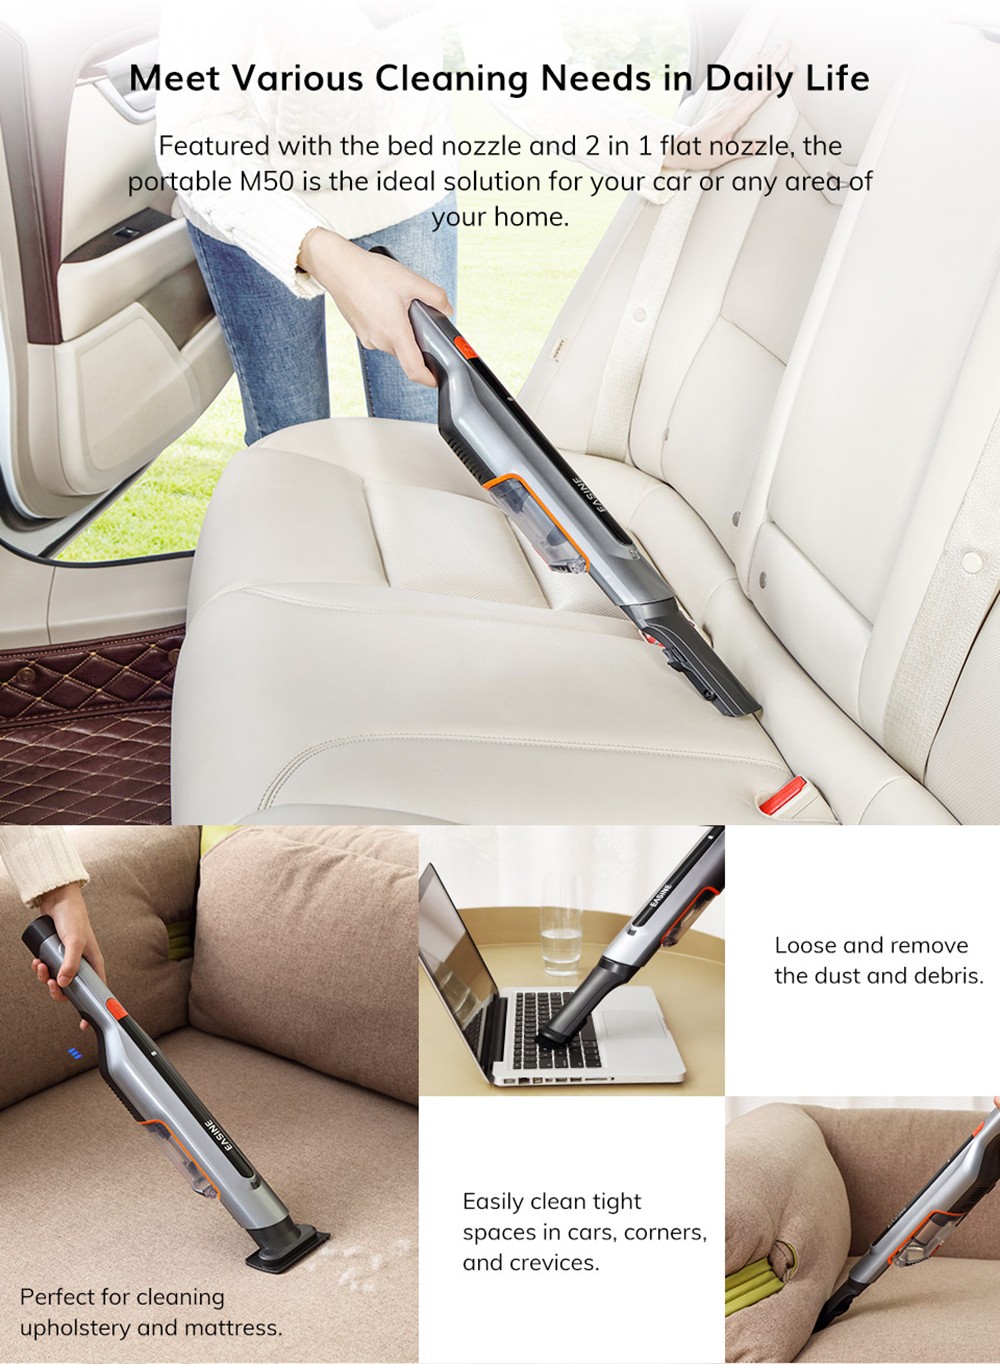 ILIFE M50 Handheld Car Vacuum Cleaner, 15000Pa Suction, 150ml Dust Cup, 2500mAh Battery, 32min Runtime, LED Lights